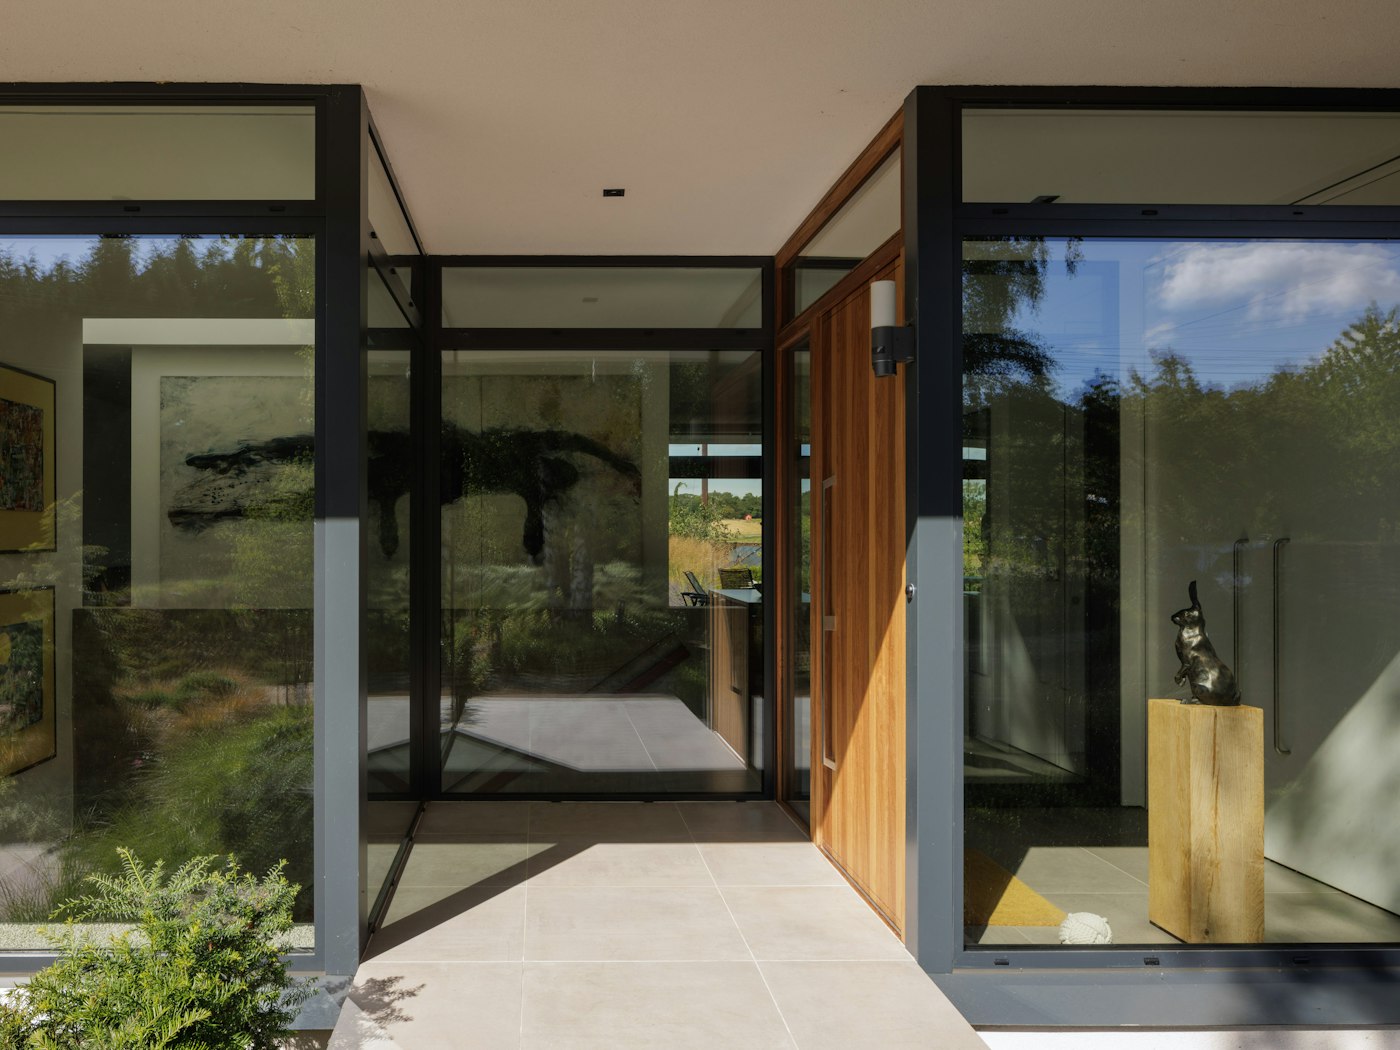 The door sits in the recessed porch of this heavily glazed eco house